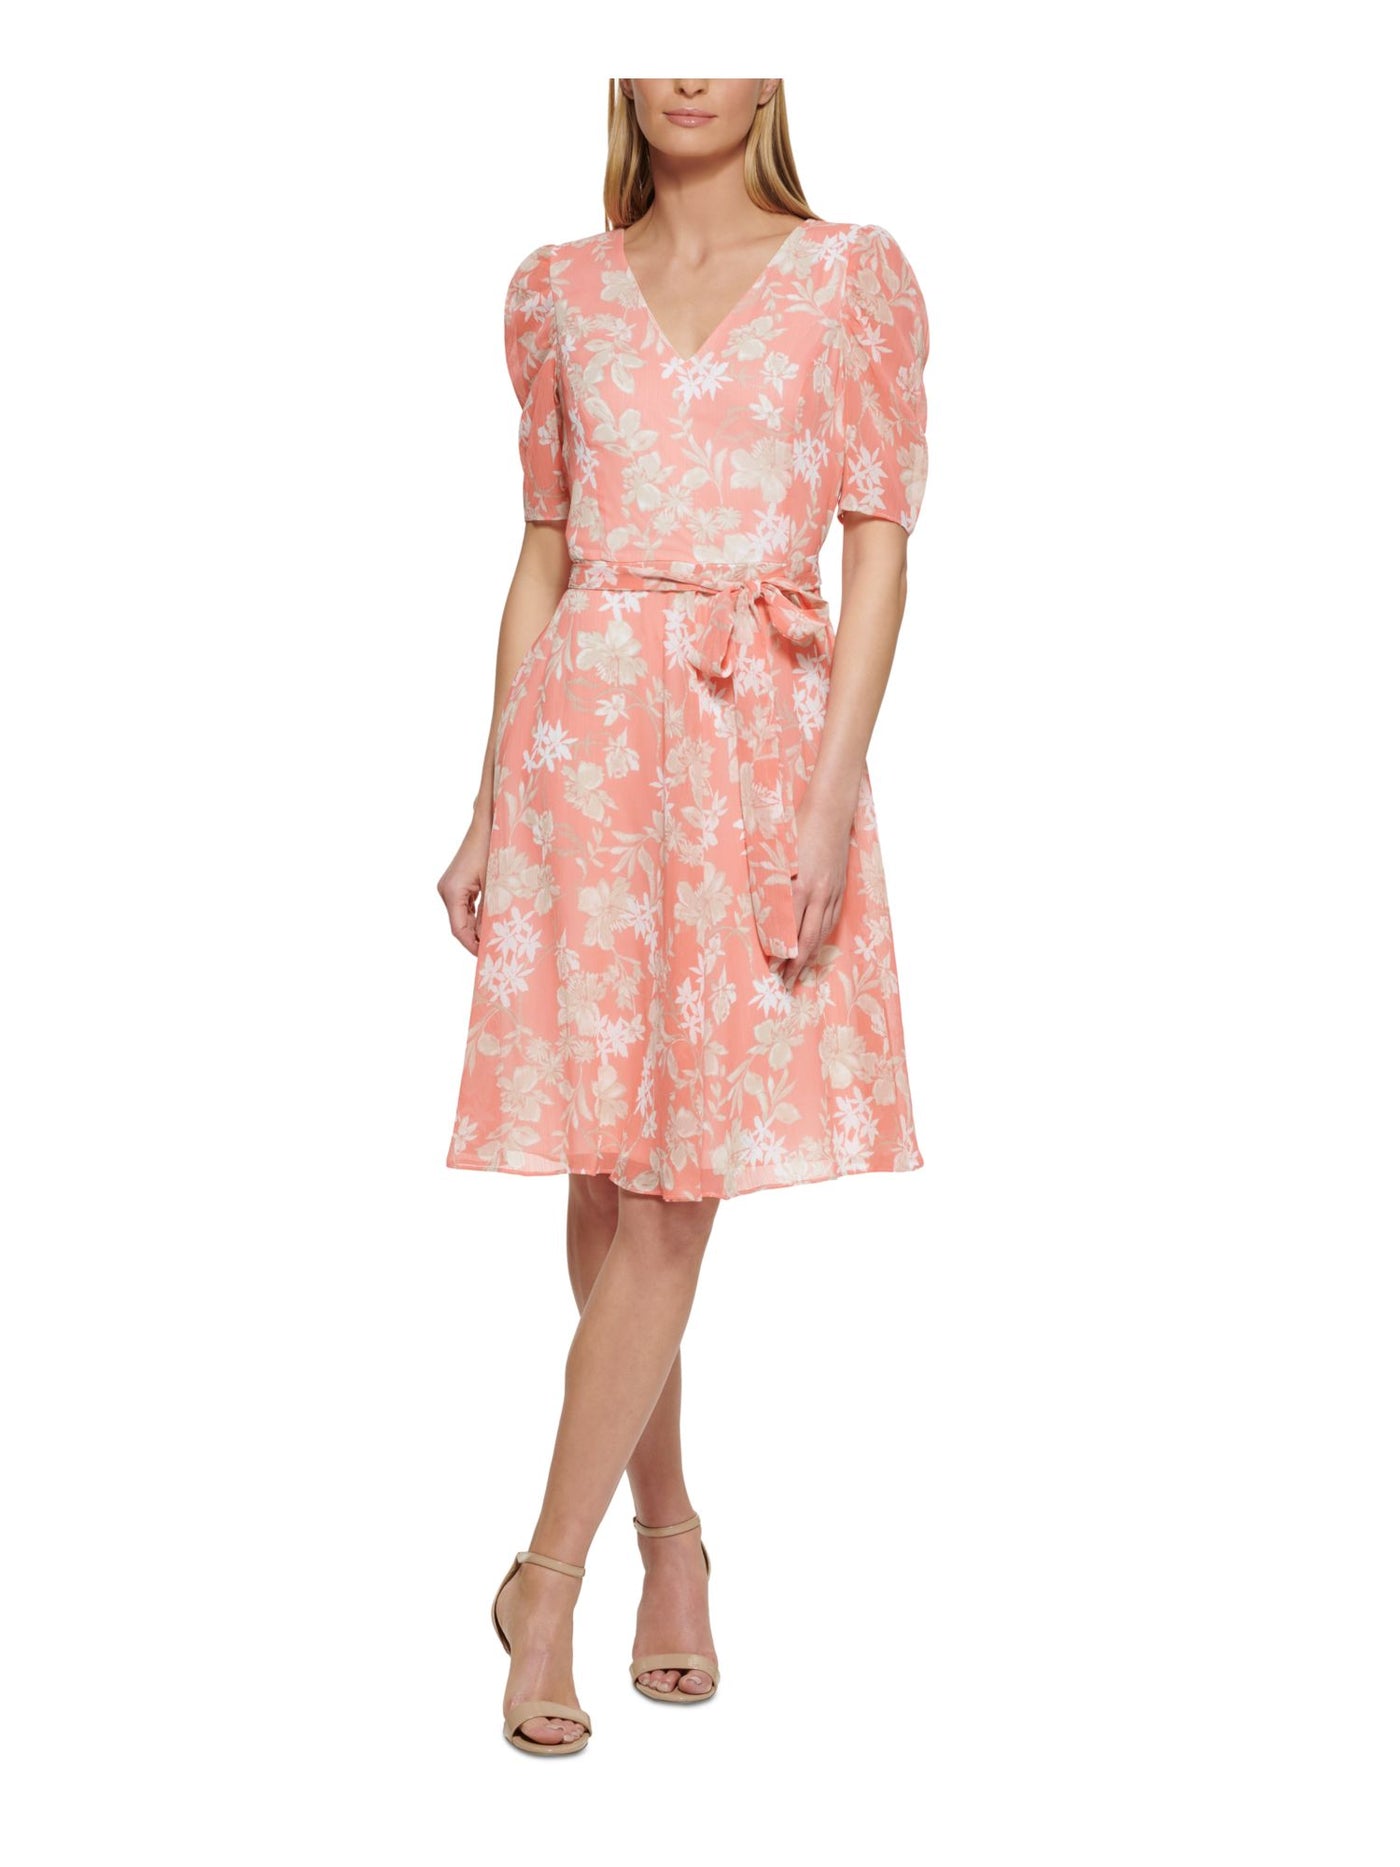 TOMMY HILFIGER Womens Pink Lined Floral Elbow Sleeve V Neck Knee Length Party Fit + Flare Dress 14